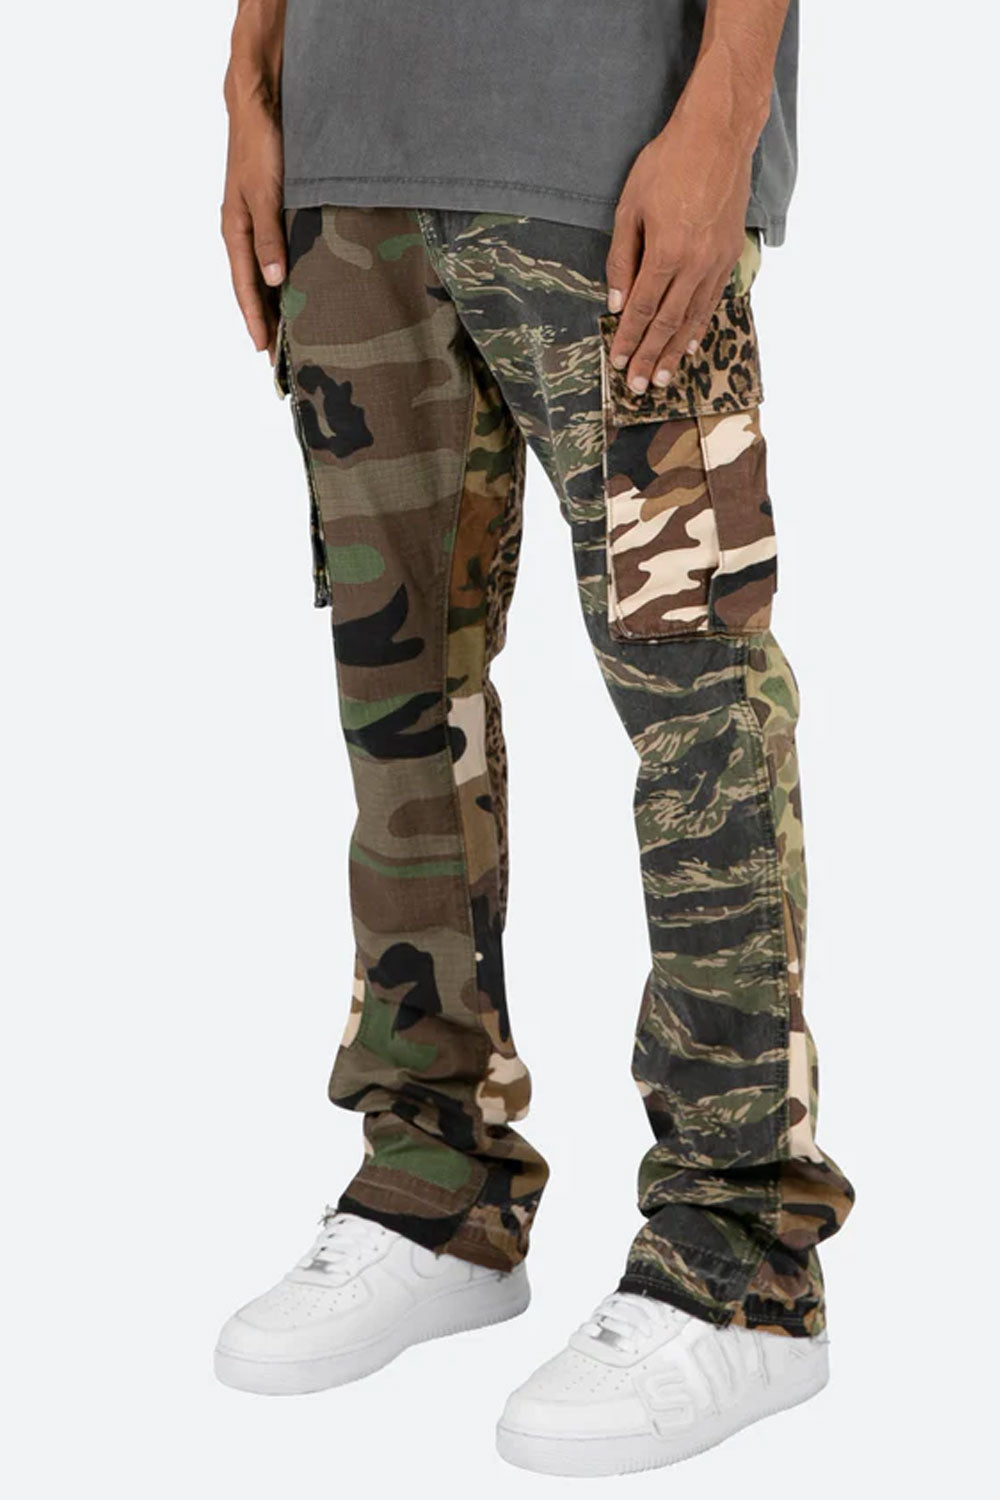 Gingtto Men's Camouflage Cargo Pants Casual Athletic Cool Pants